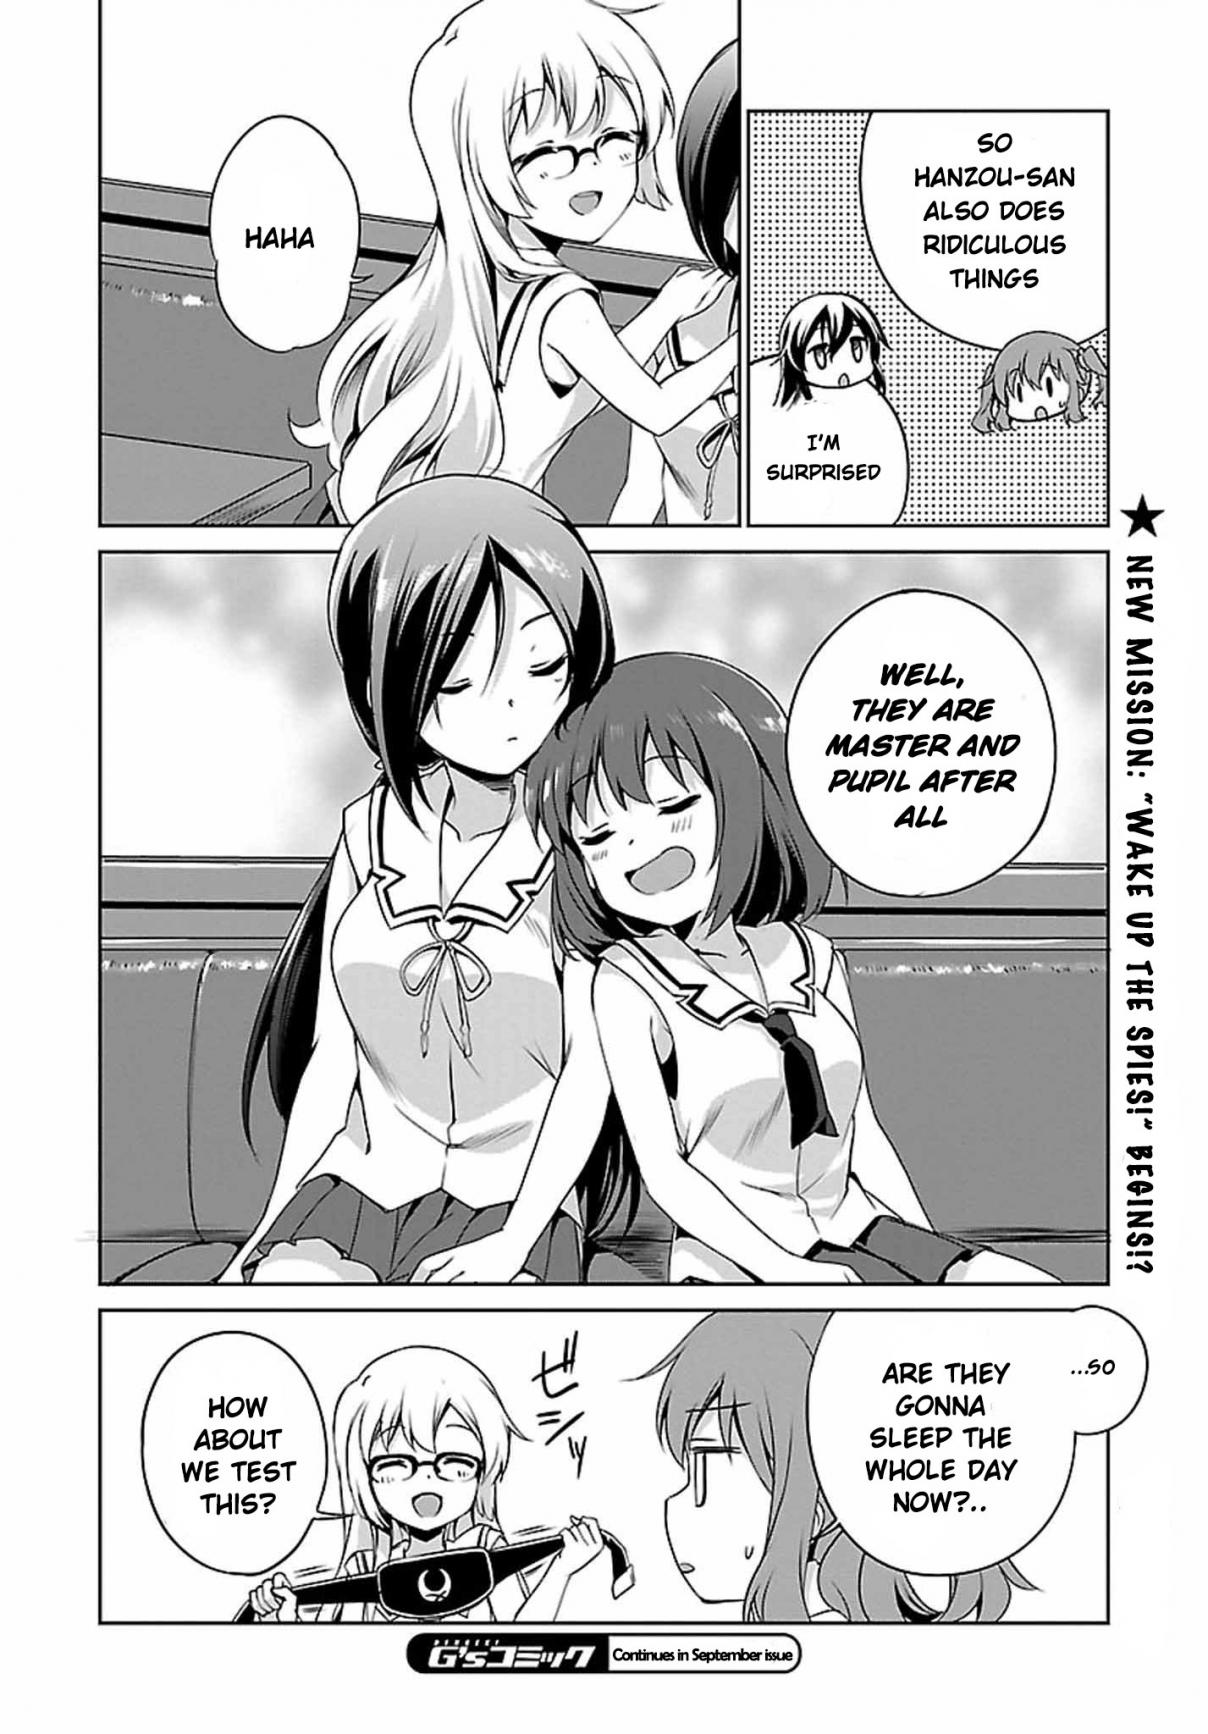 Release the Spyce Secret Mission Ch. 5